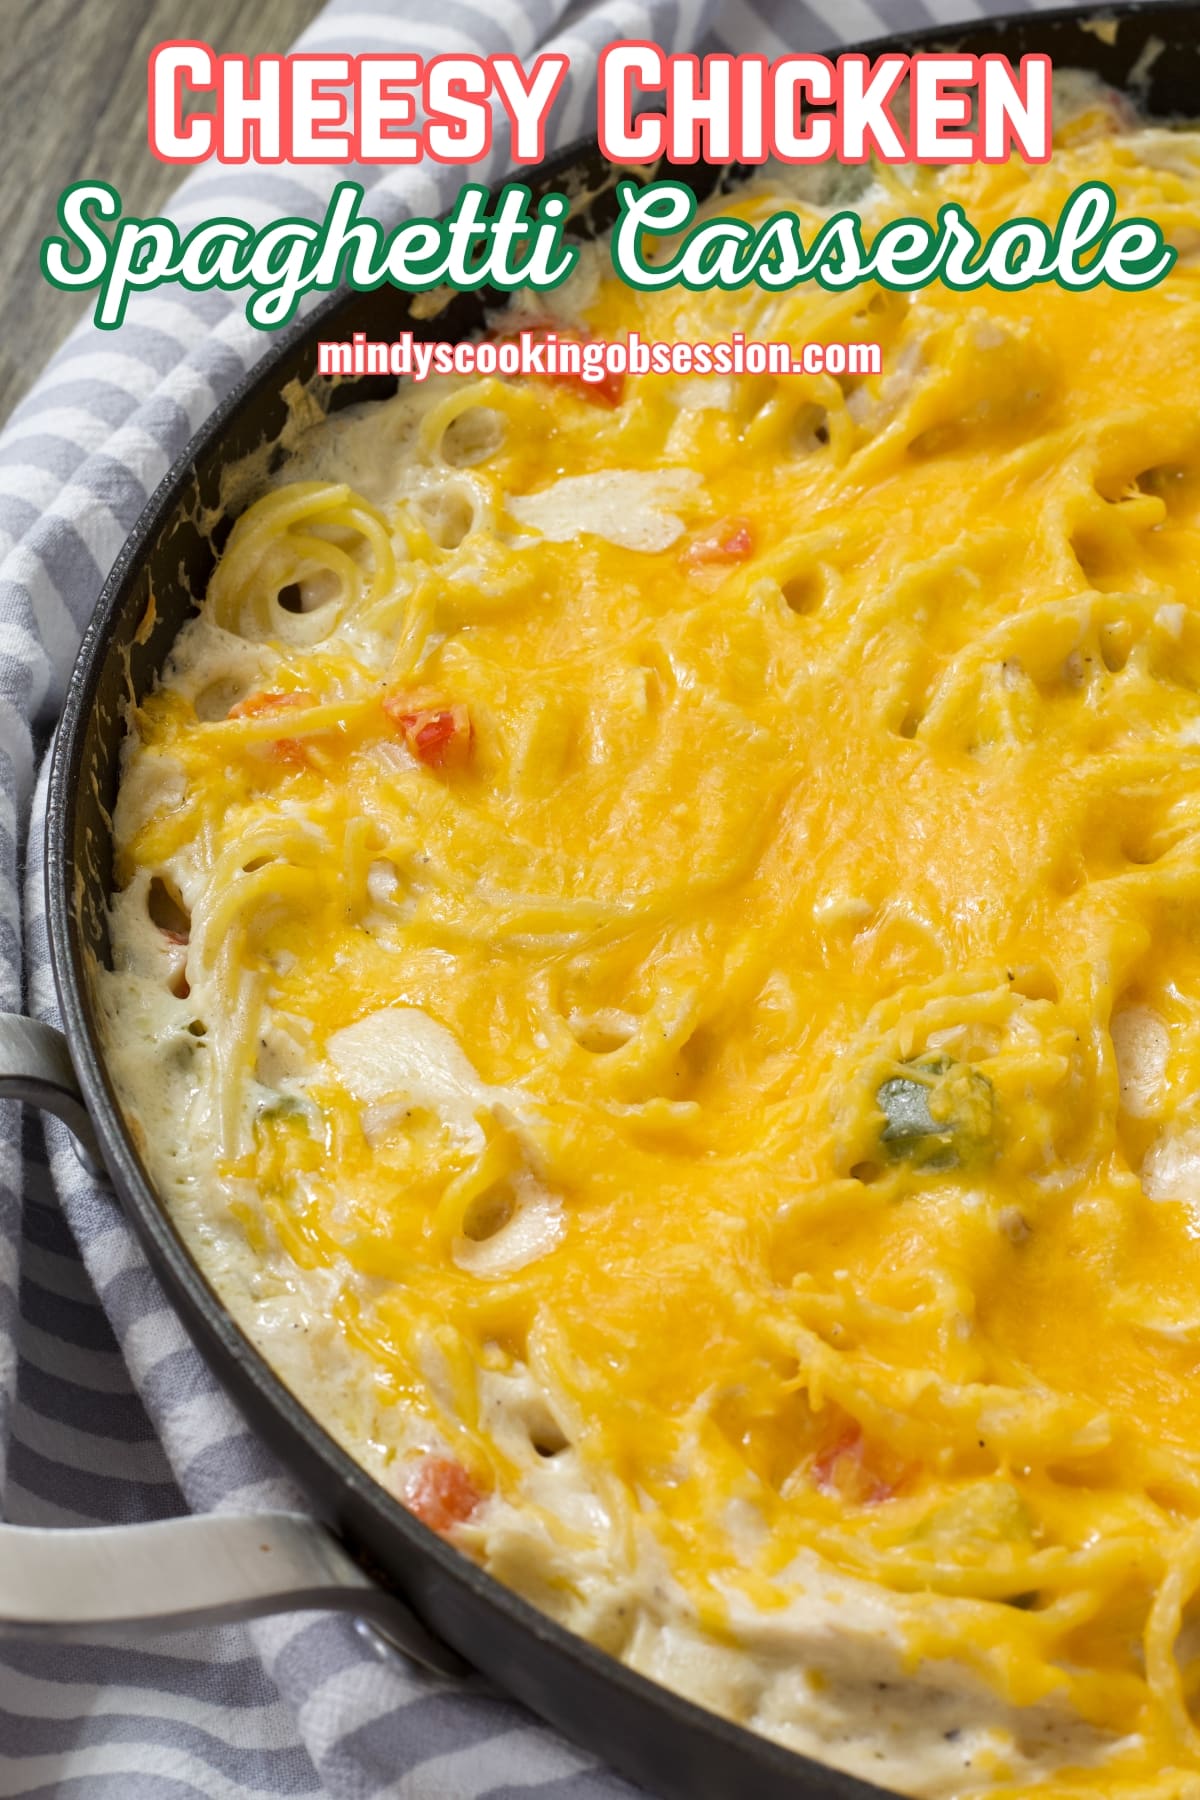 Cheesy Chicken Spaghetti Casserole (lighter recipe): A guilt-free twist on a classic, delivering savory goodness without the extra calories. Indulge smartly! via @mindyscookingobsession